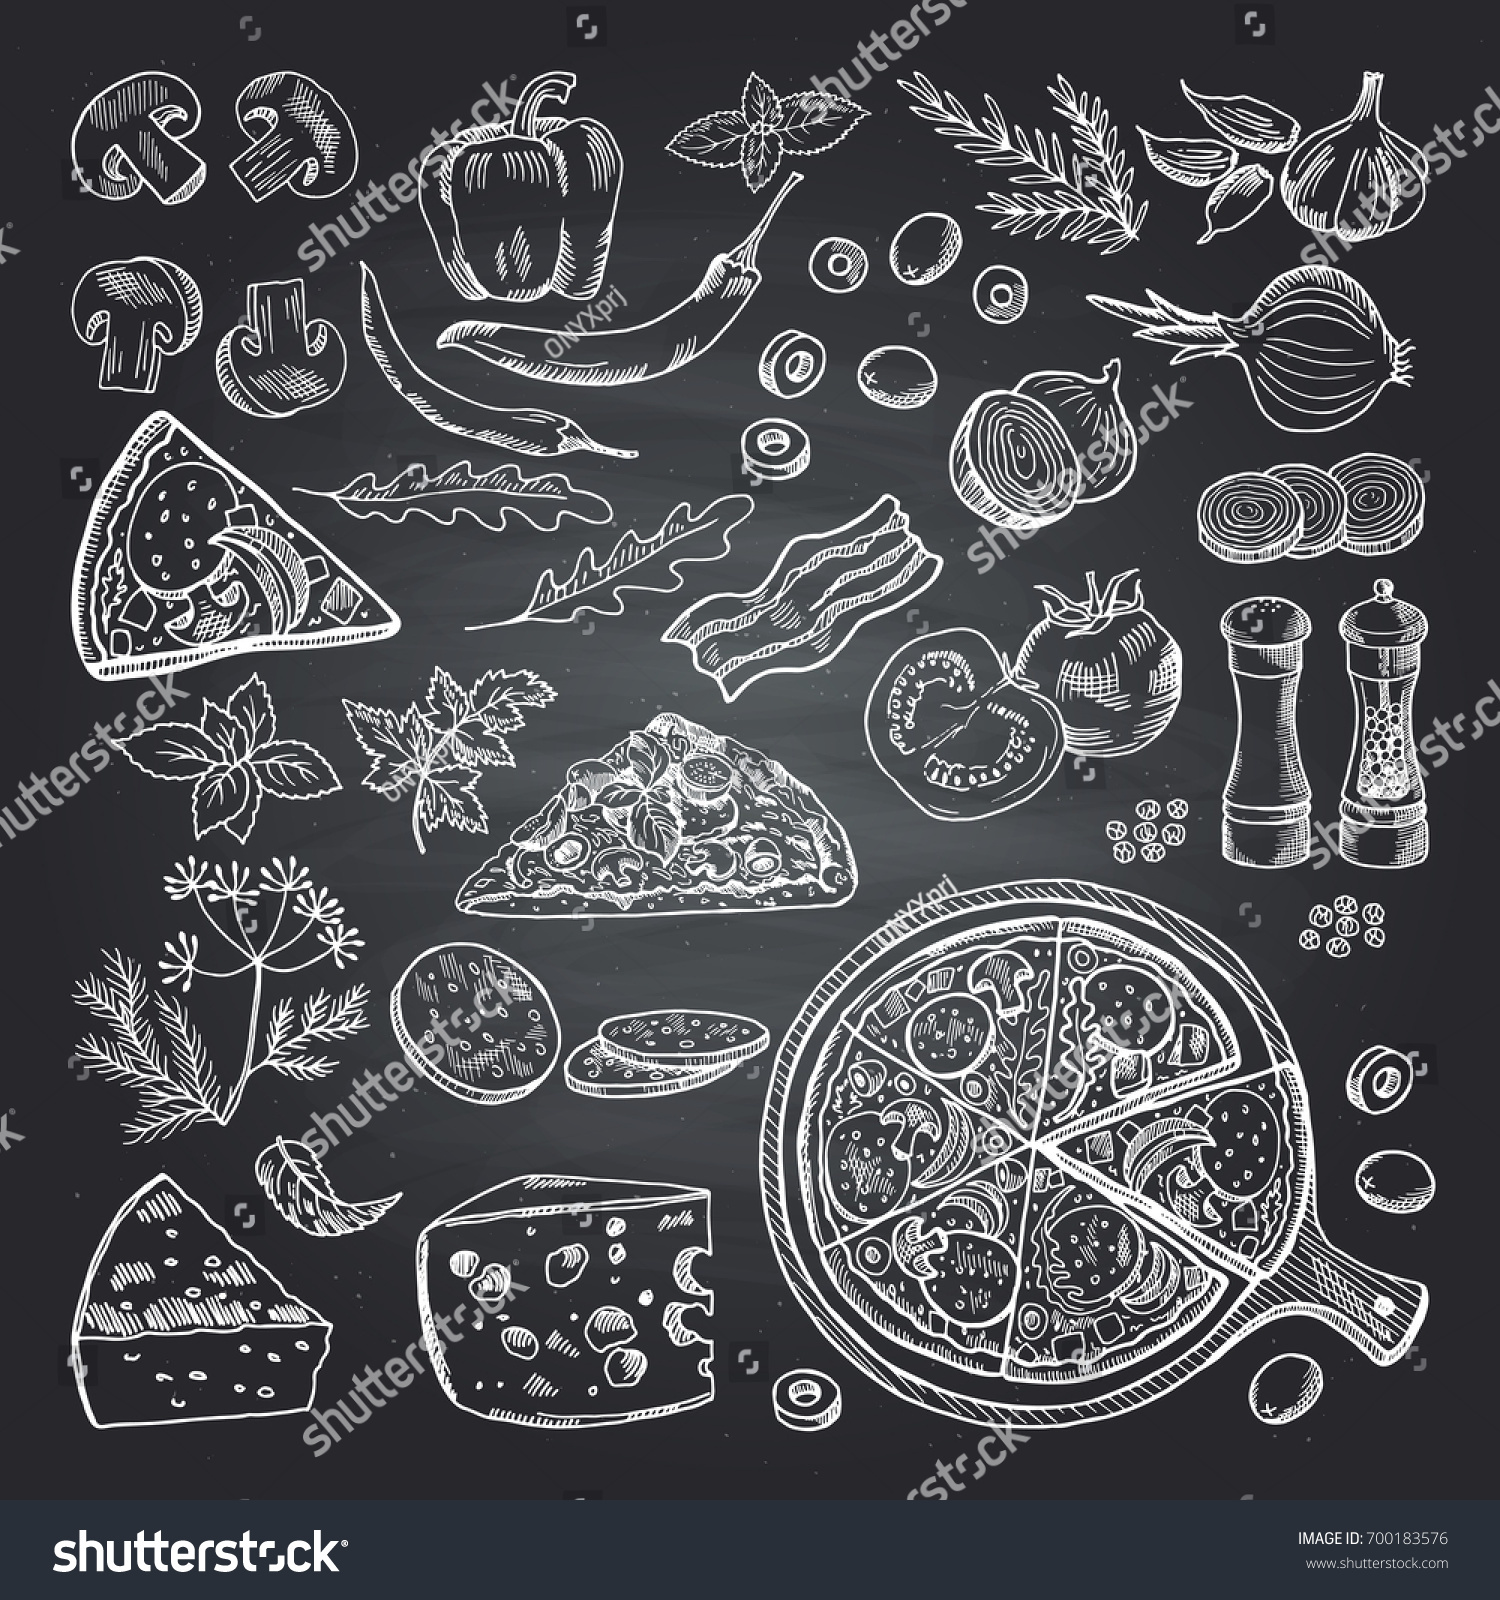 Illustrations of pizza ingredients on black chalkboard. Pictures set of italian kitchen #700183576